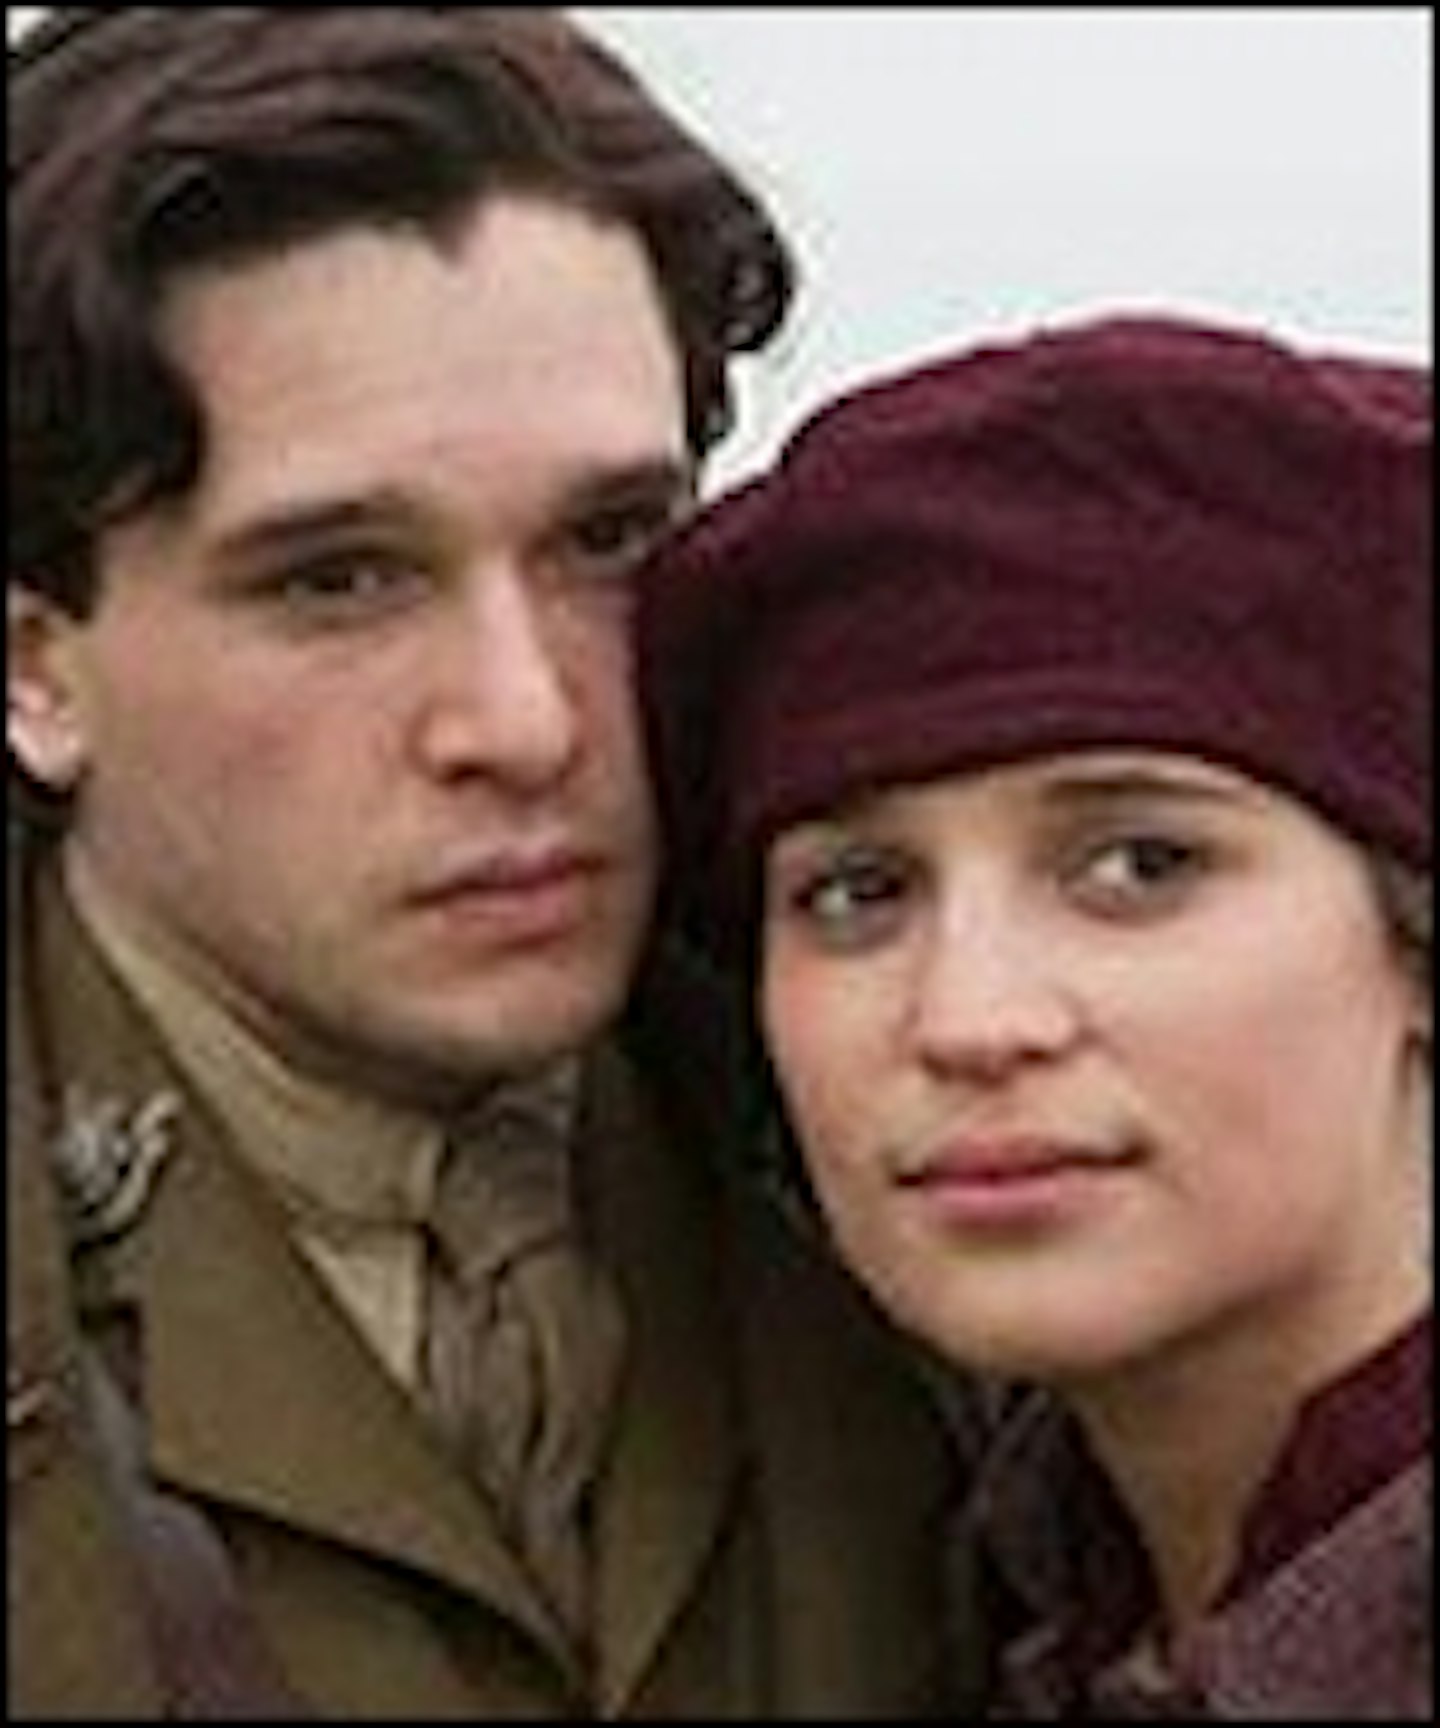 First Testament Of Youth Trailer Arrives